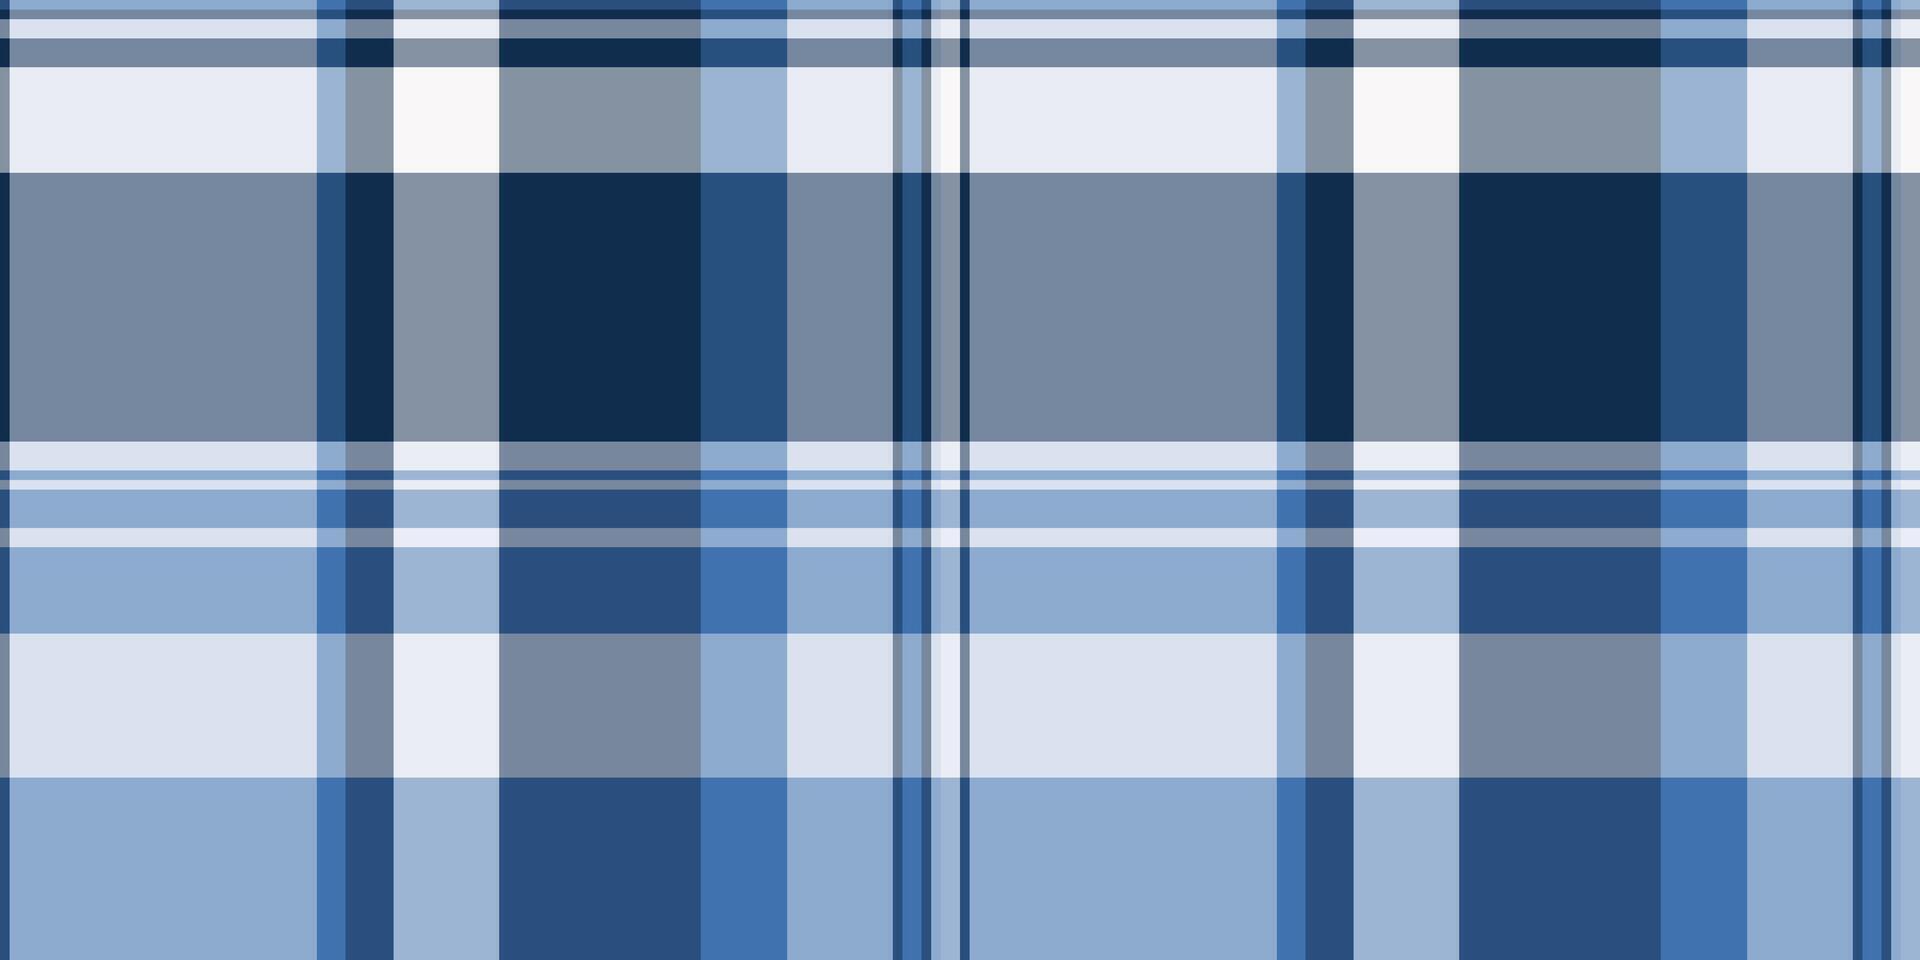 Stitch vector texture background, colourful plaid tartan check. Graphic fabric pattern seamless textile in blue and light colors.